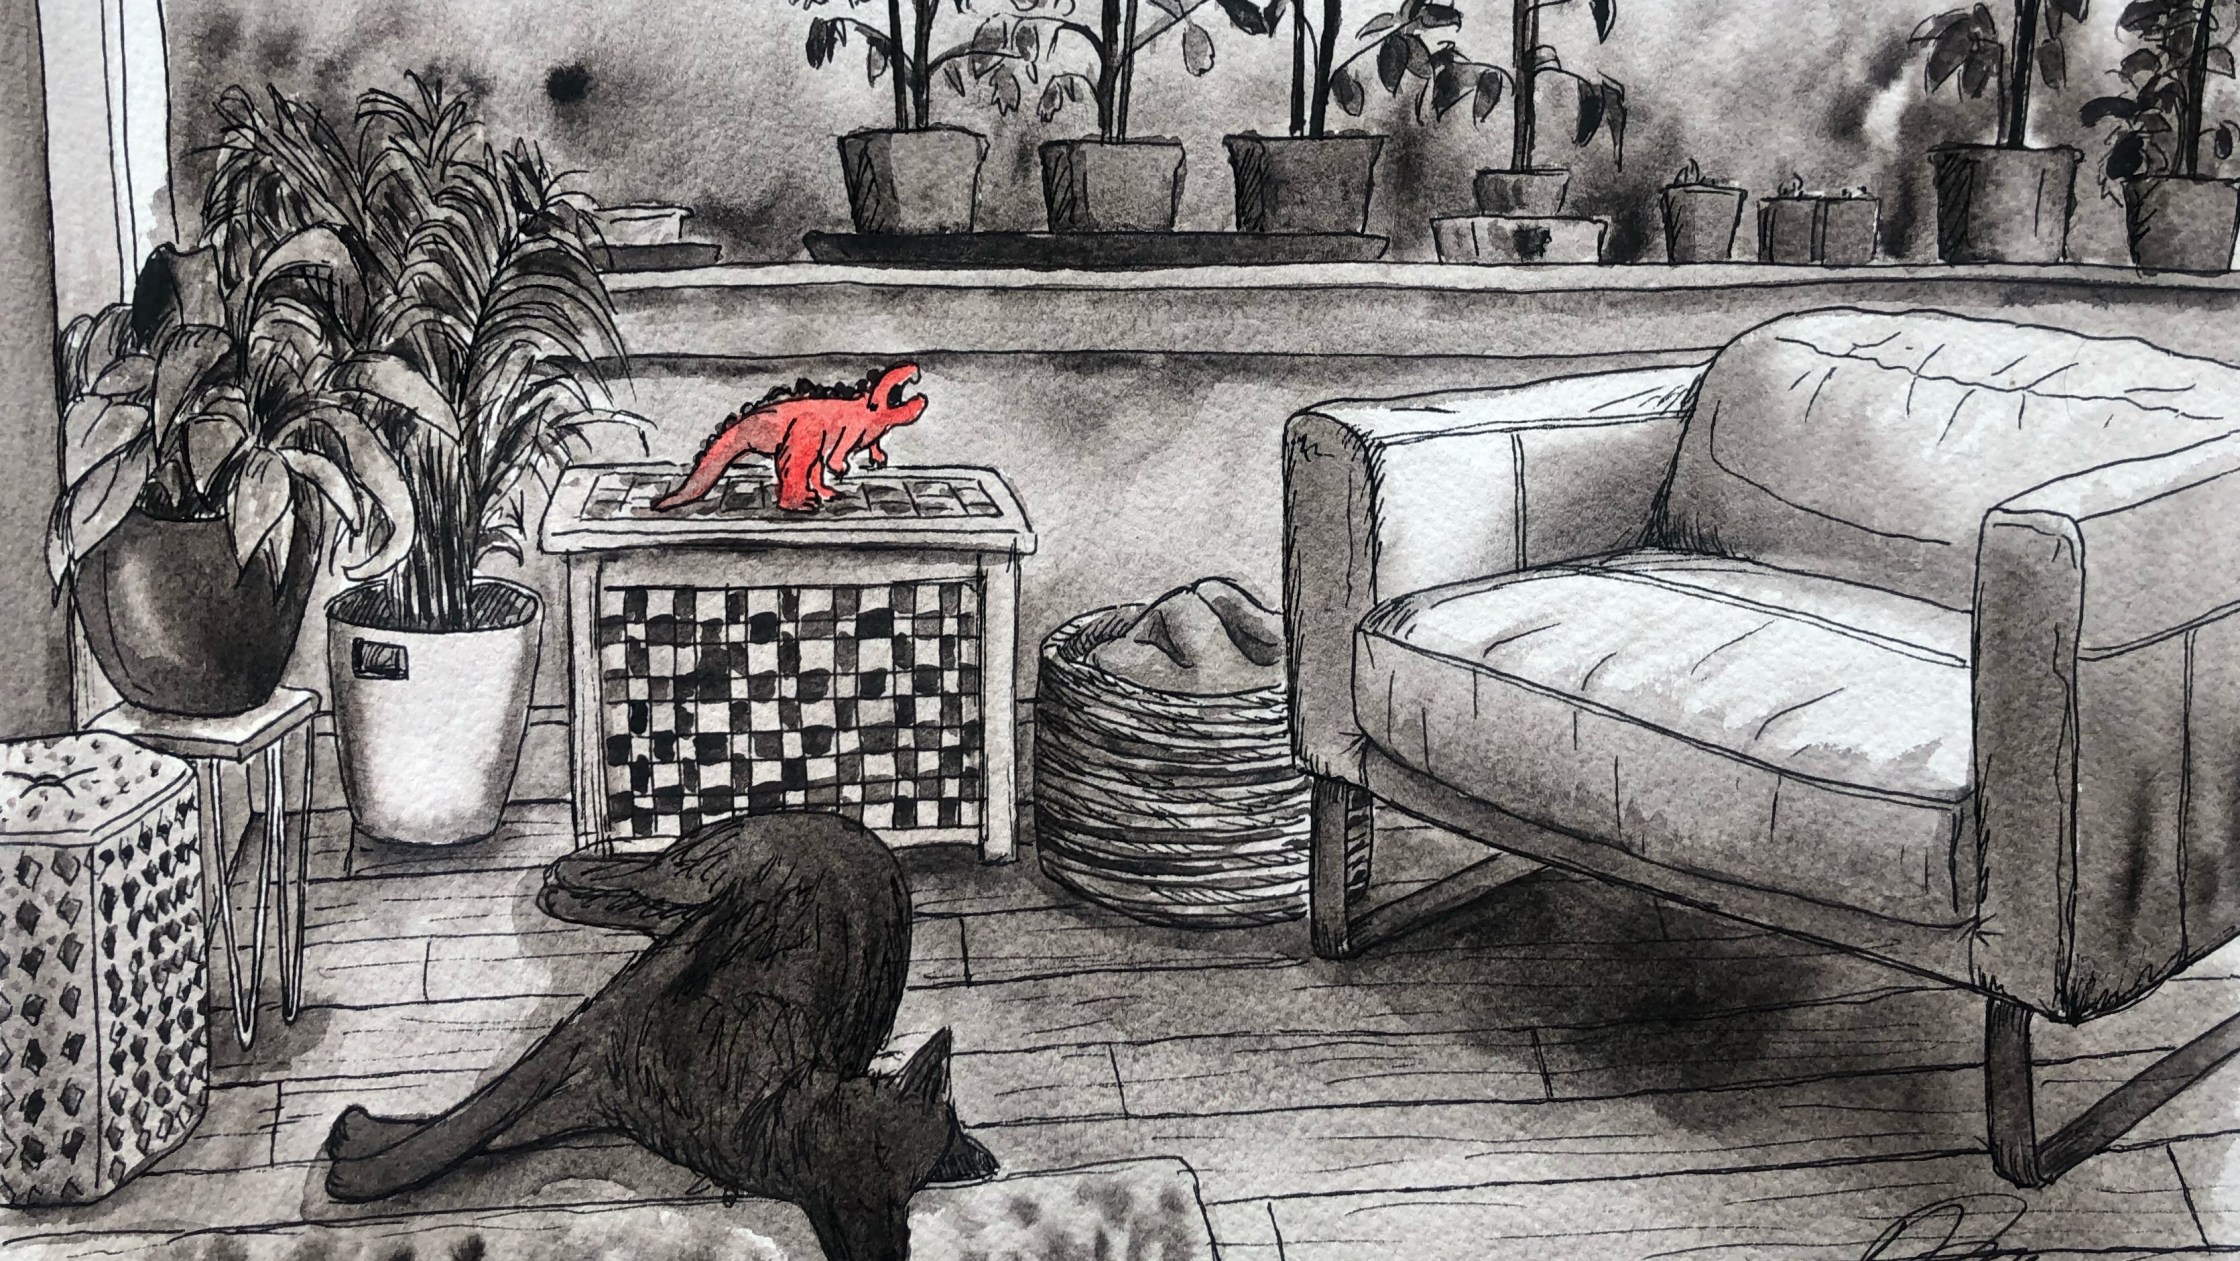 Illustration of living room with tomato plants and dog.